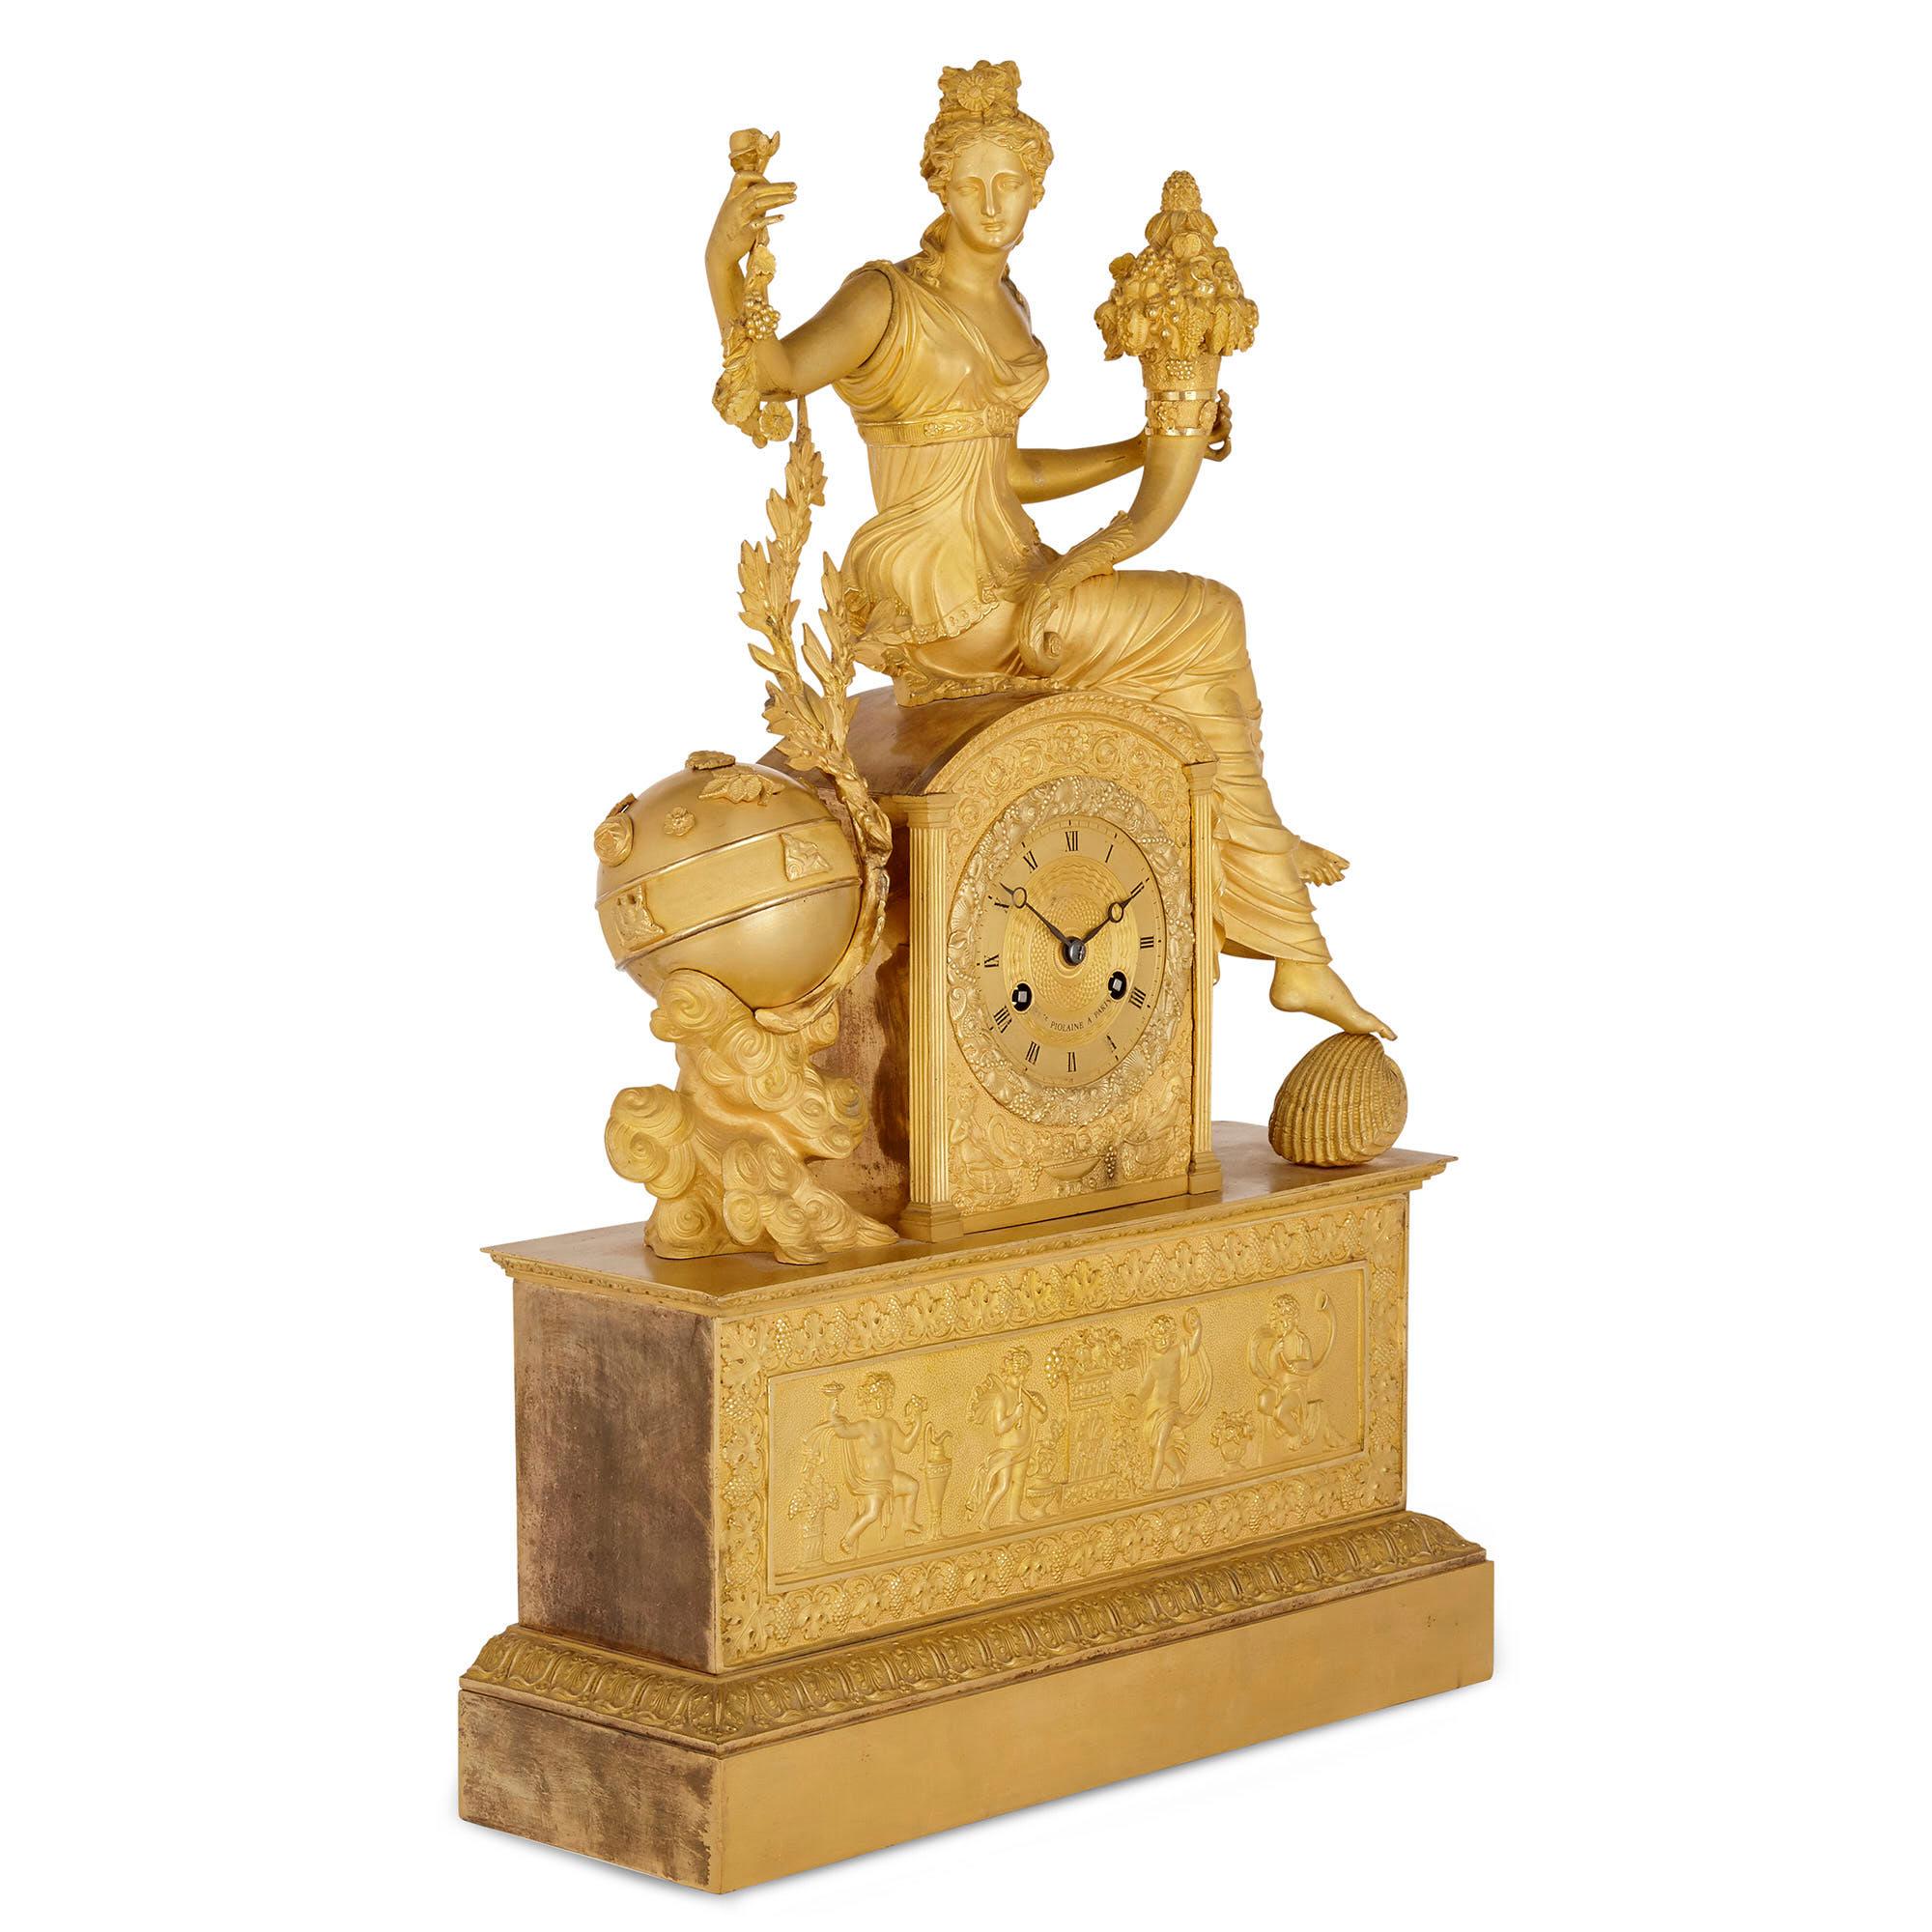 This large and impressive gilt bronze mantel clock is by the French Michel-François Piolaine. The clock body is raised by an architecturally formed, plinth-shaped base, set to the front with a relief scene, also of gilt bronze, portraying four putti